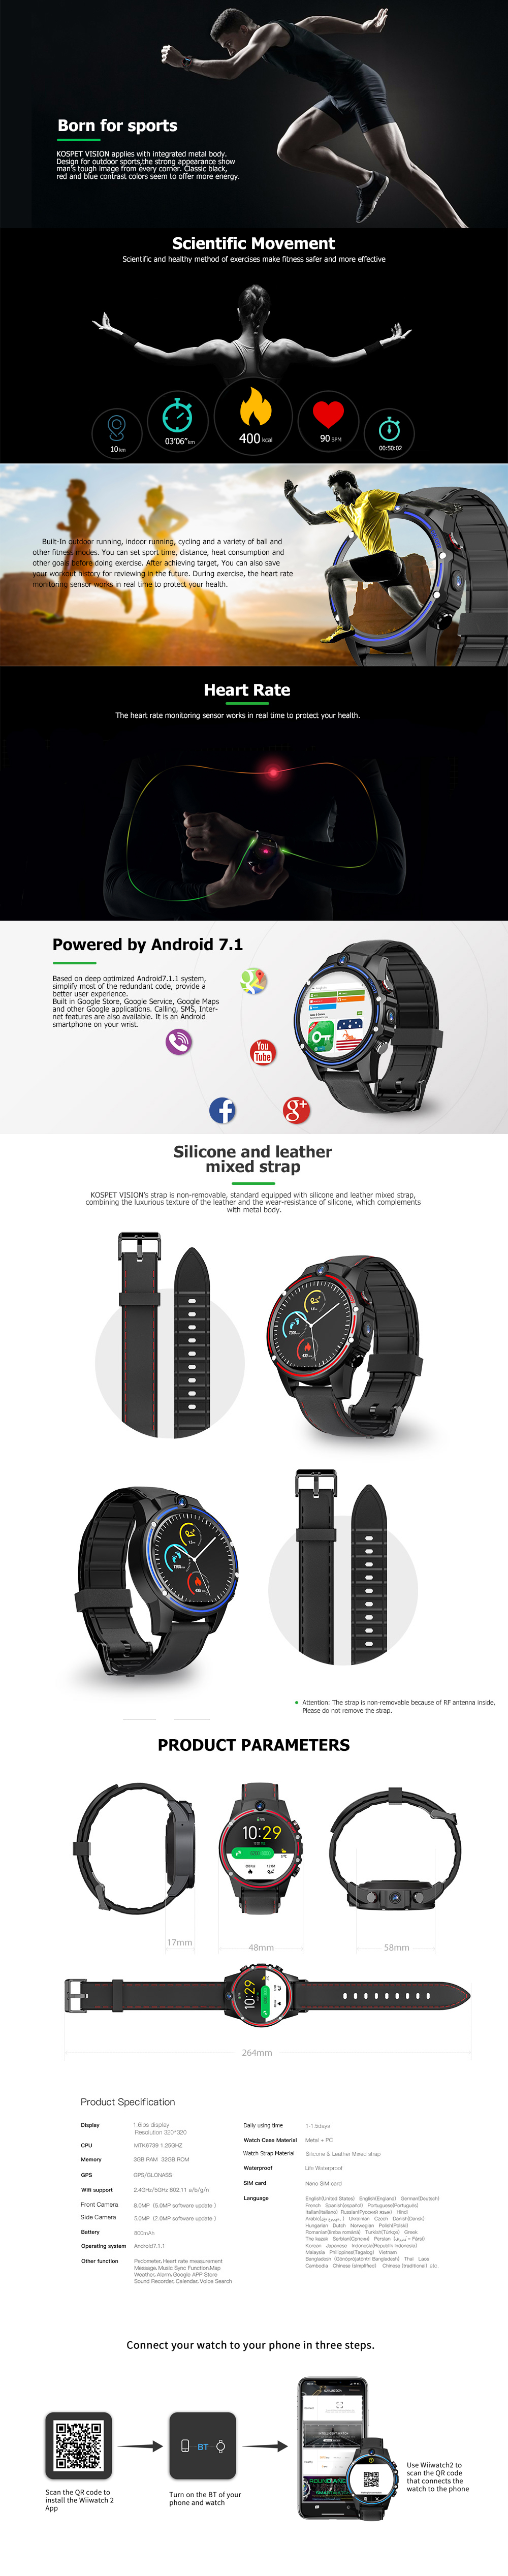 Kospet Vision 1.6' LTPS Crystal Display 3G+32G 5.0MP Front-facing Dual Camera 4G-LTE Video Call 800mAh Google Play Leather Strap Smart Watch Phone 16